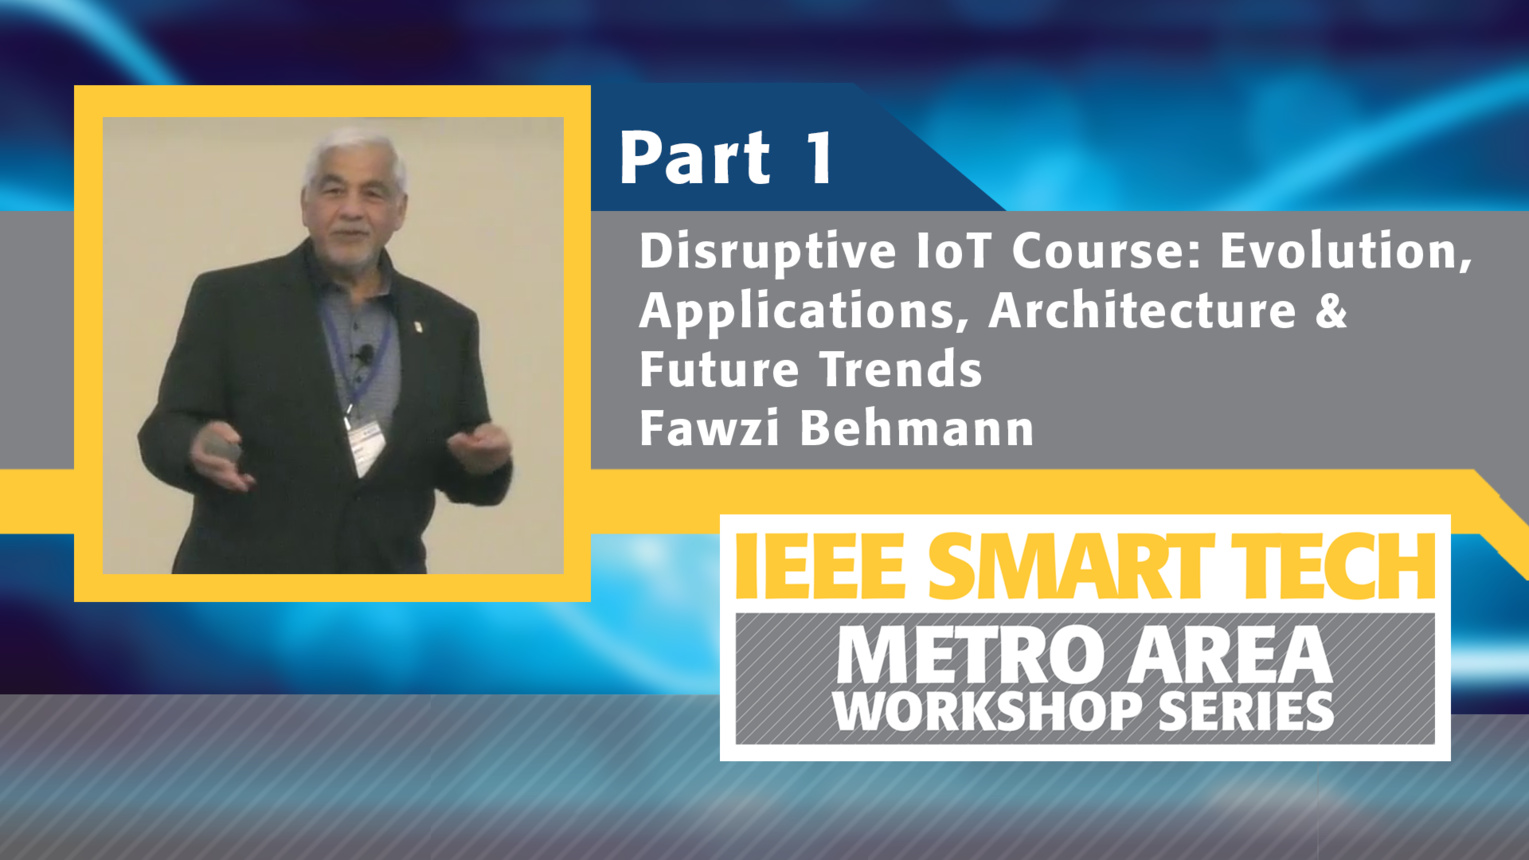 Disruptive Internet of Things course - Evolution, Applications, Architecture and Future Trends, Part 1